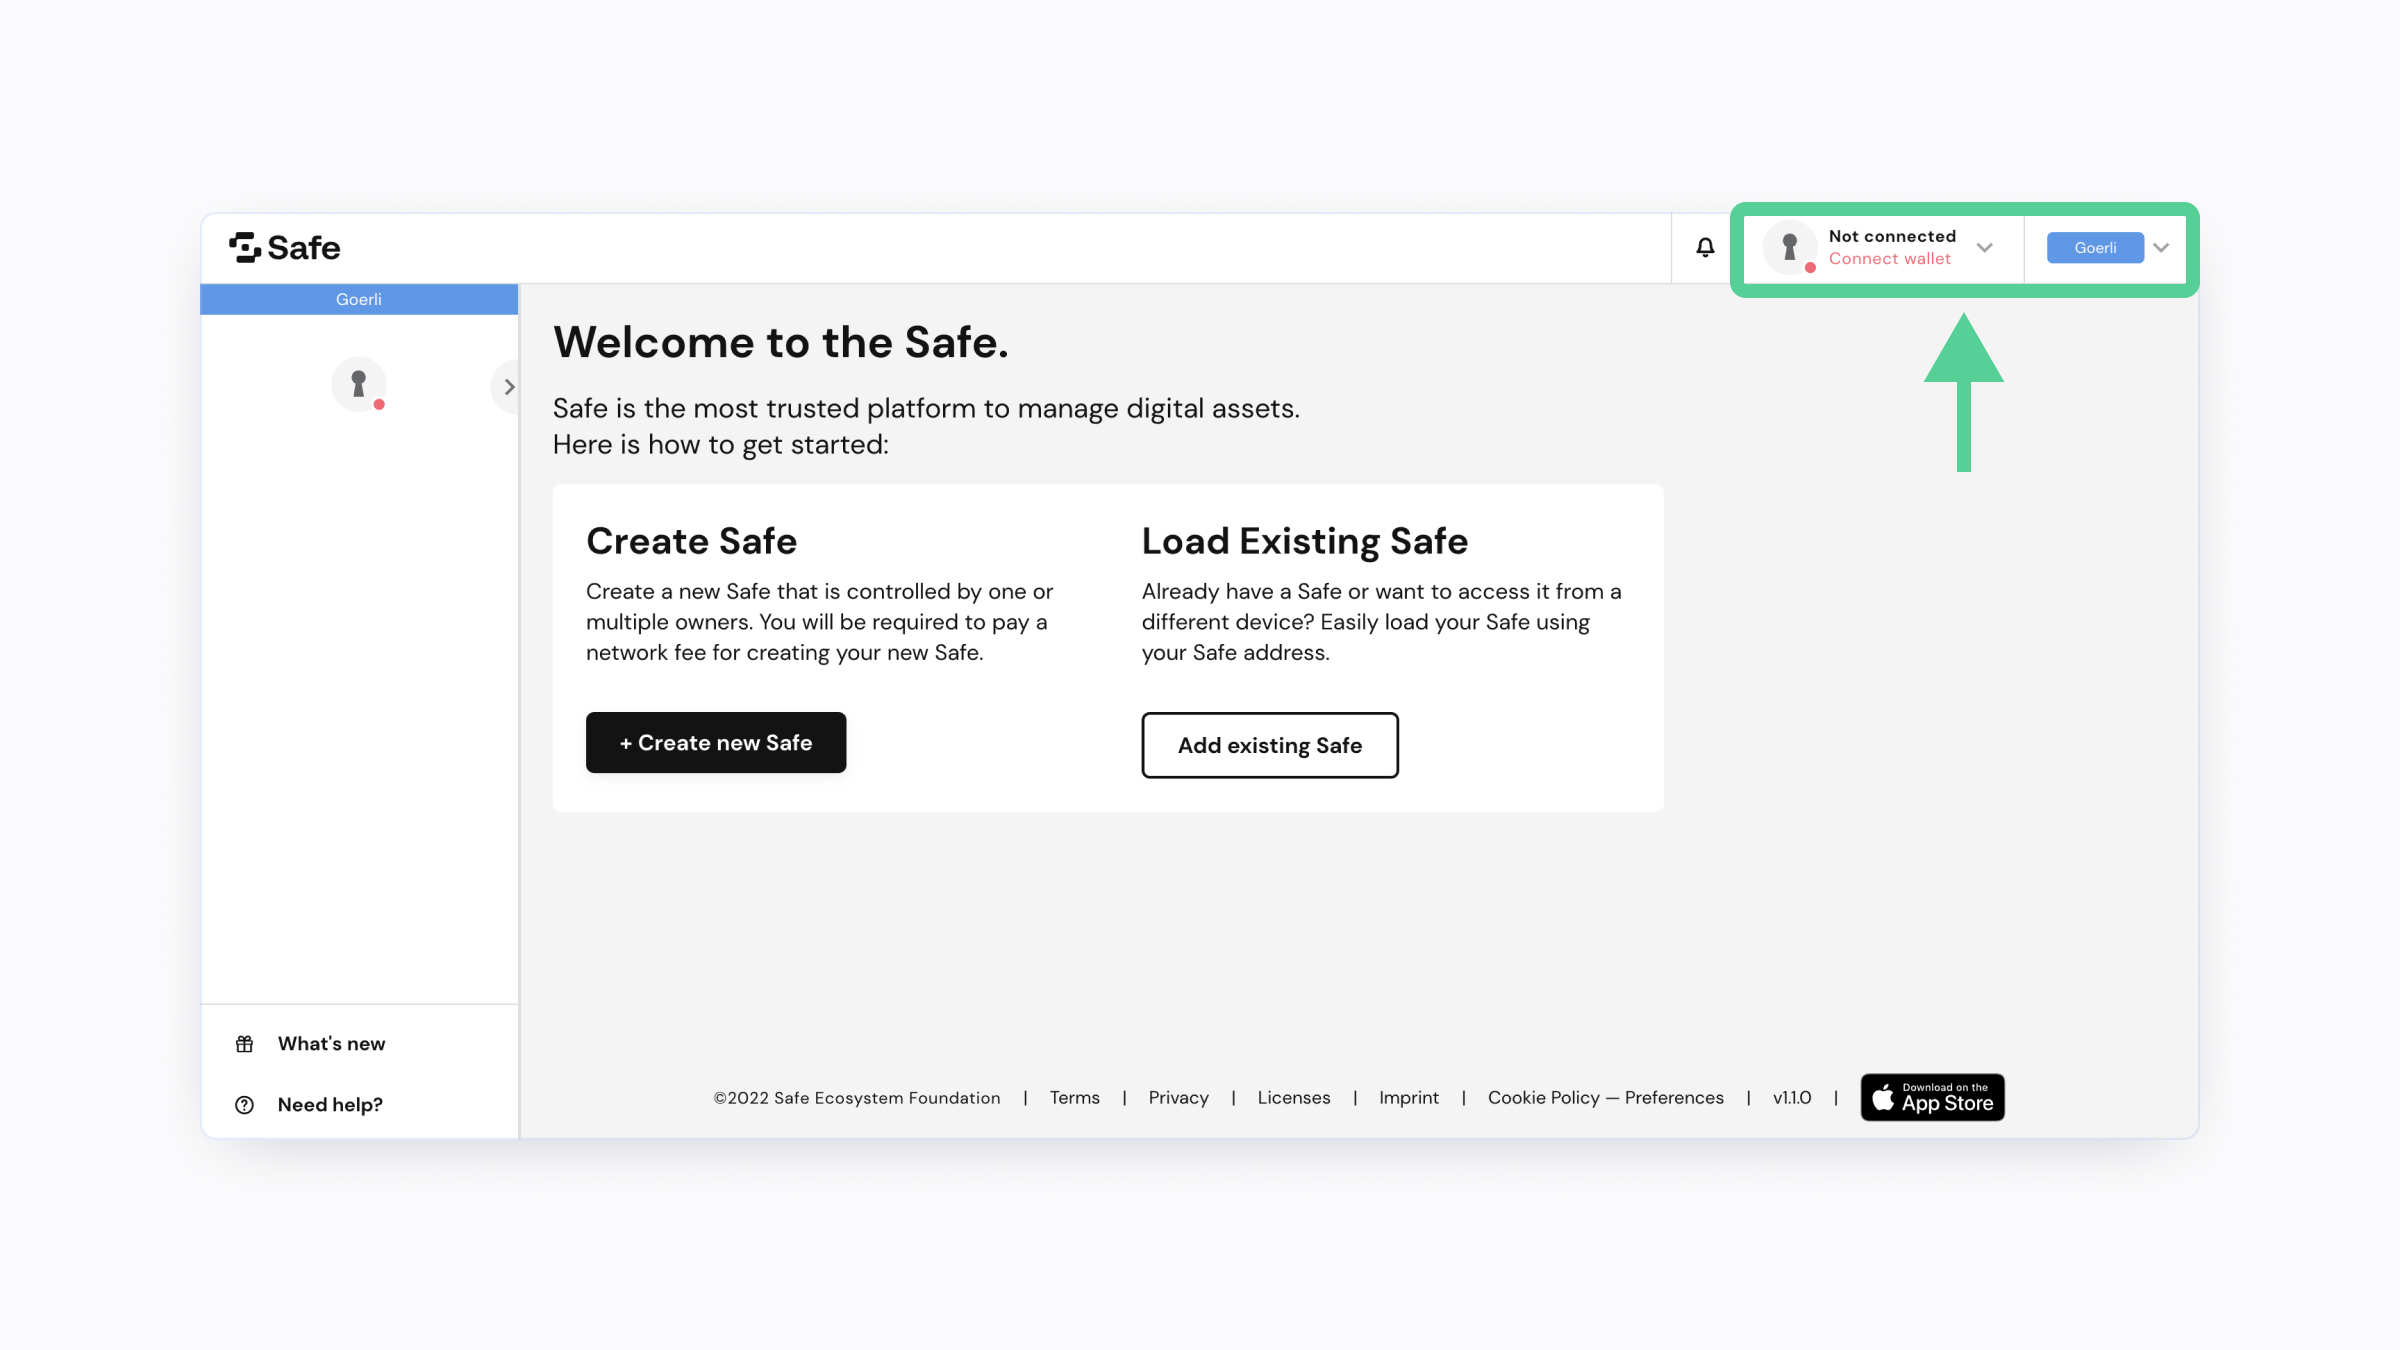 A screenshot of the Safe application that highlights the "Connect wallet" section of the webpage. 